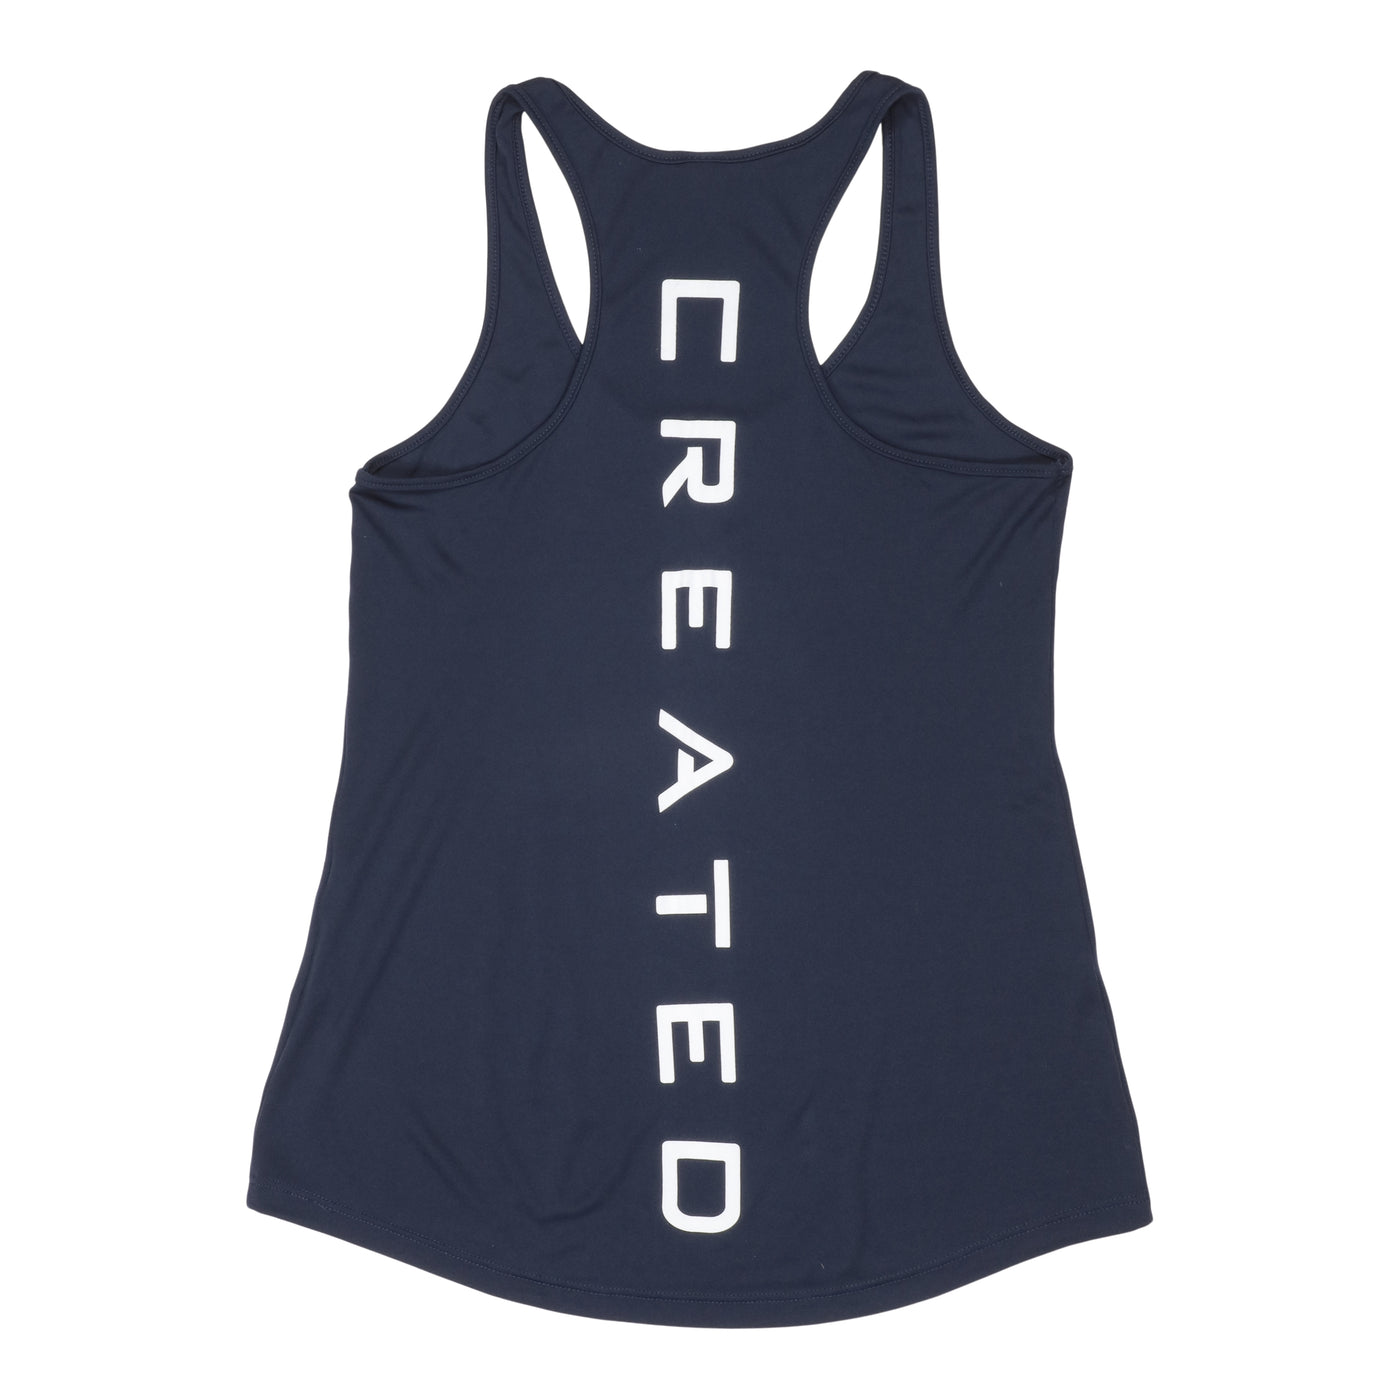 Created Women's Performance navy tank top rear view